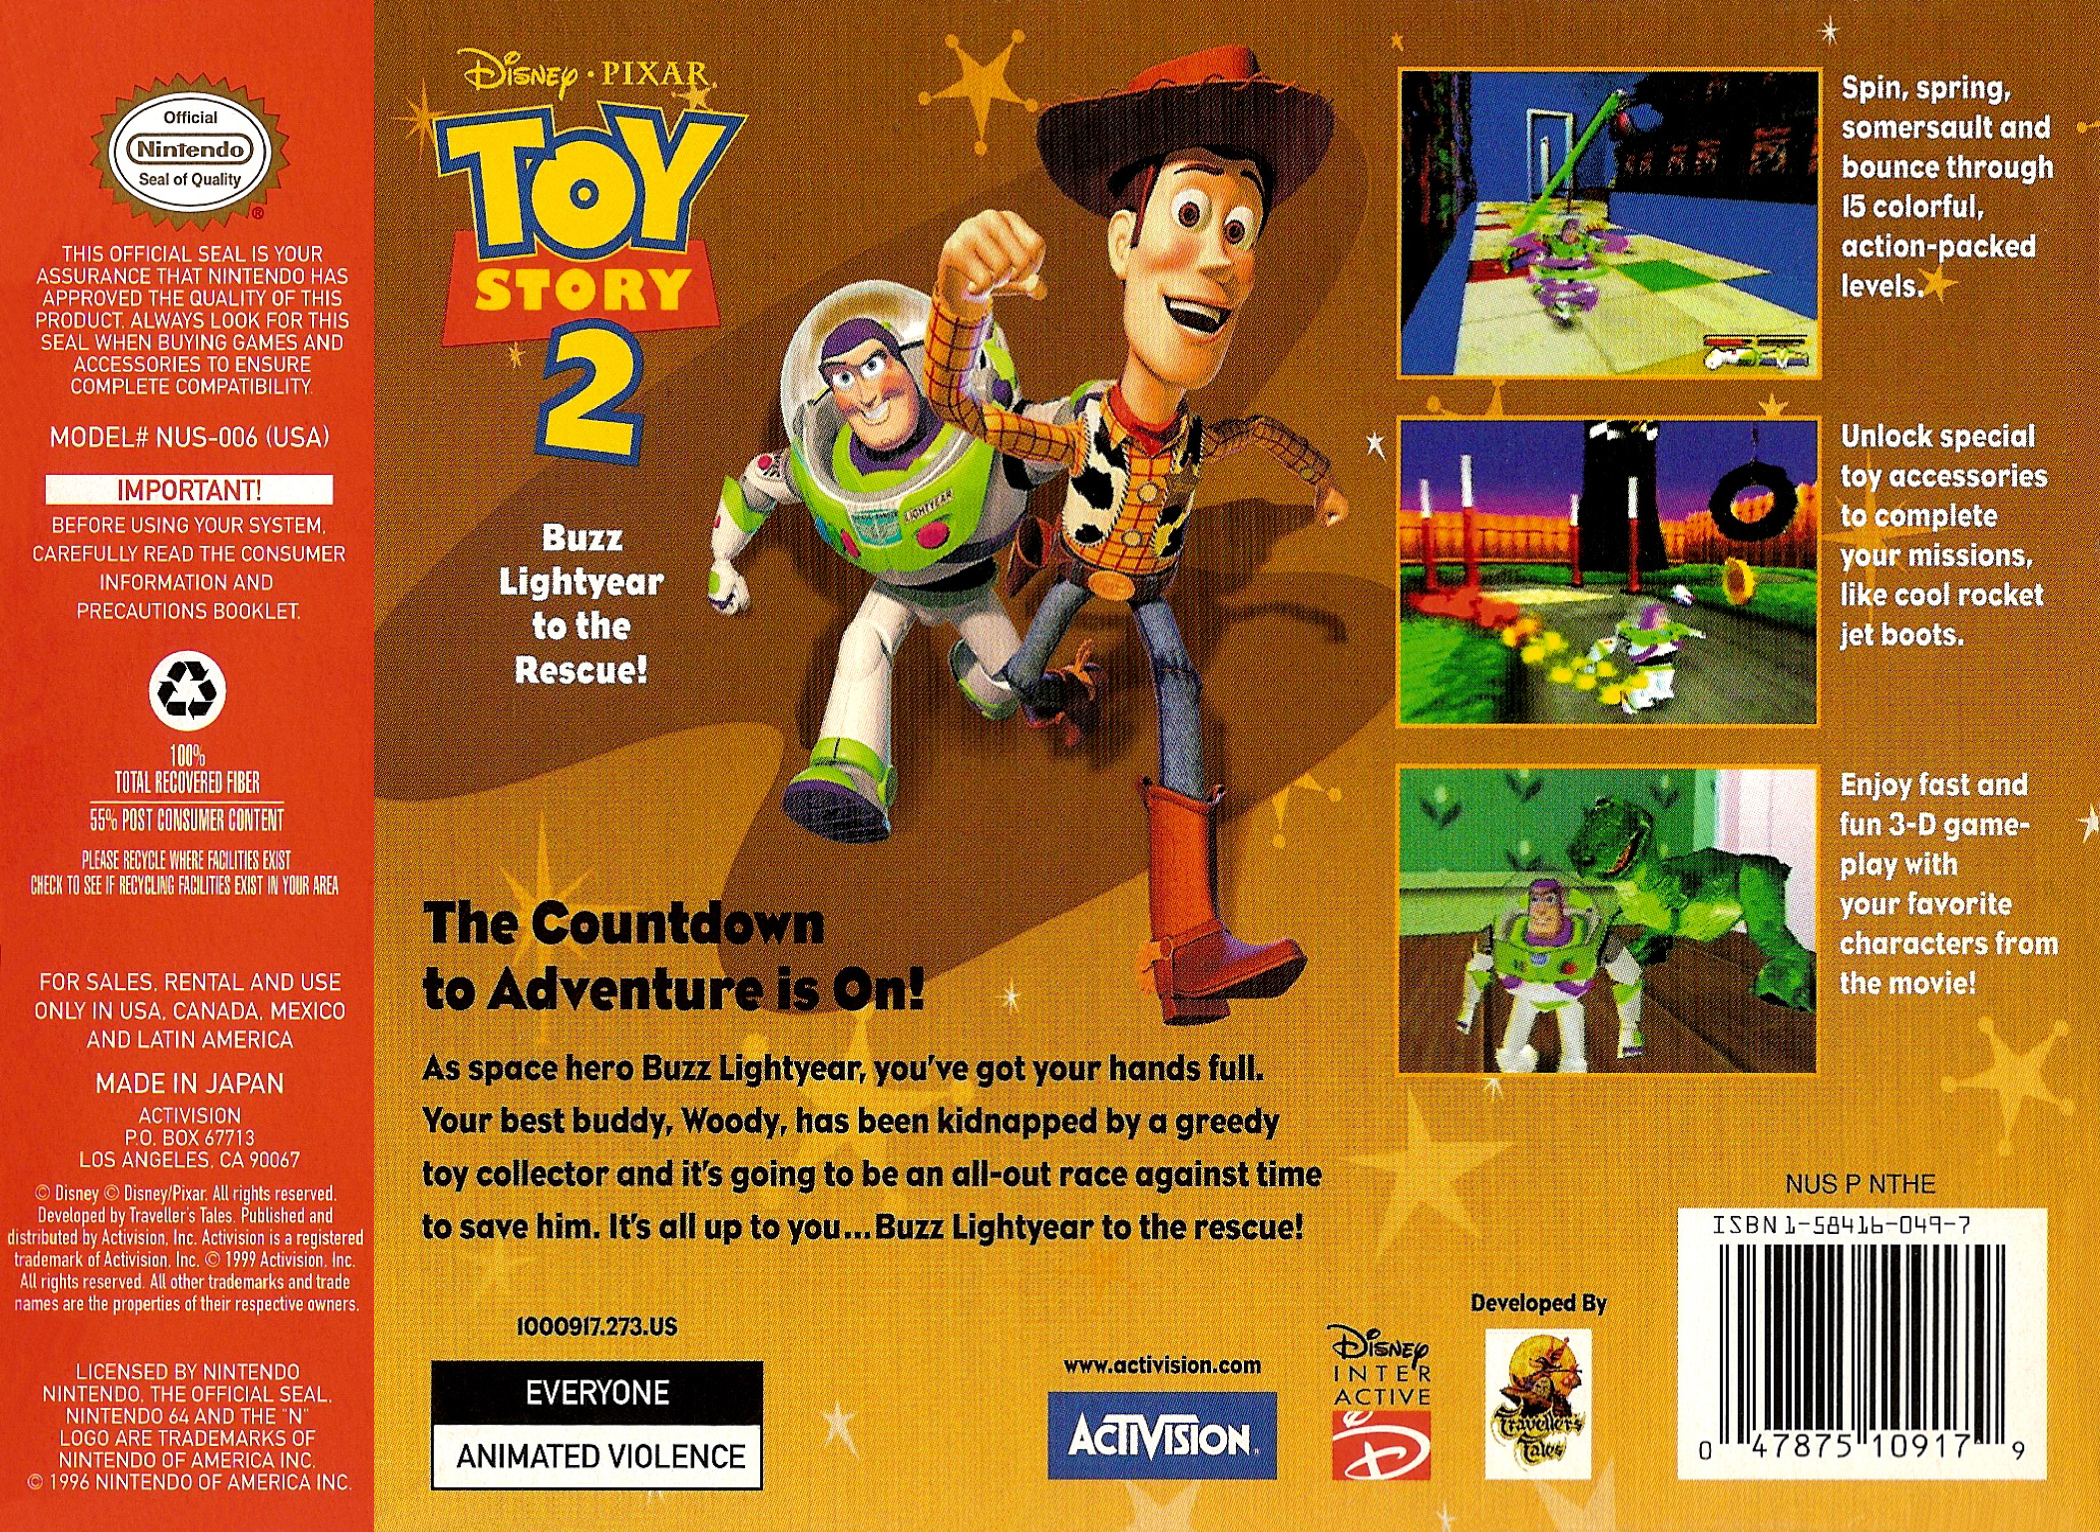 Tgdb Browse Game Disney Pixar Toy Story 2 Buzz Lightyear To The Rescue